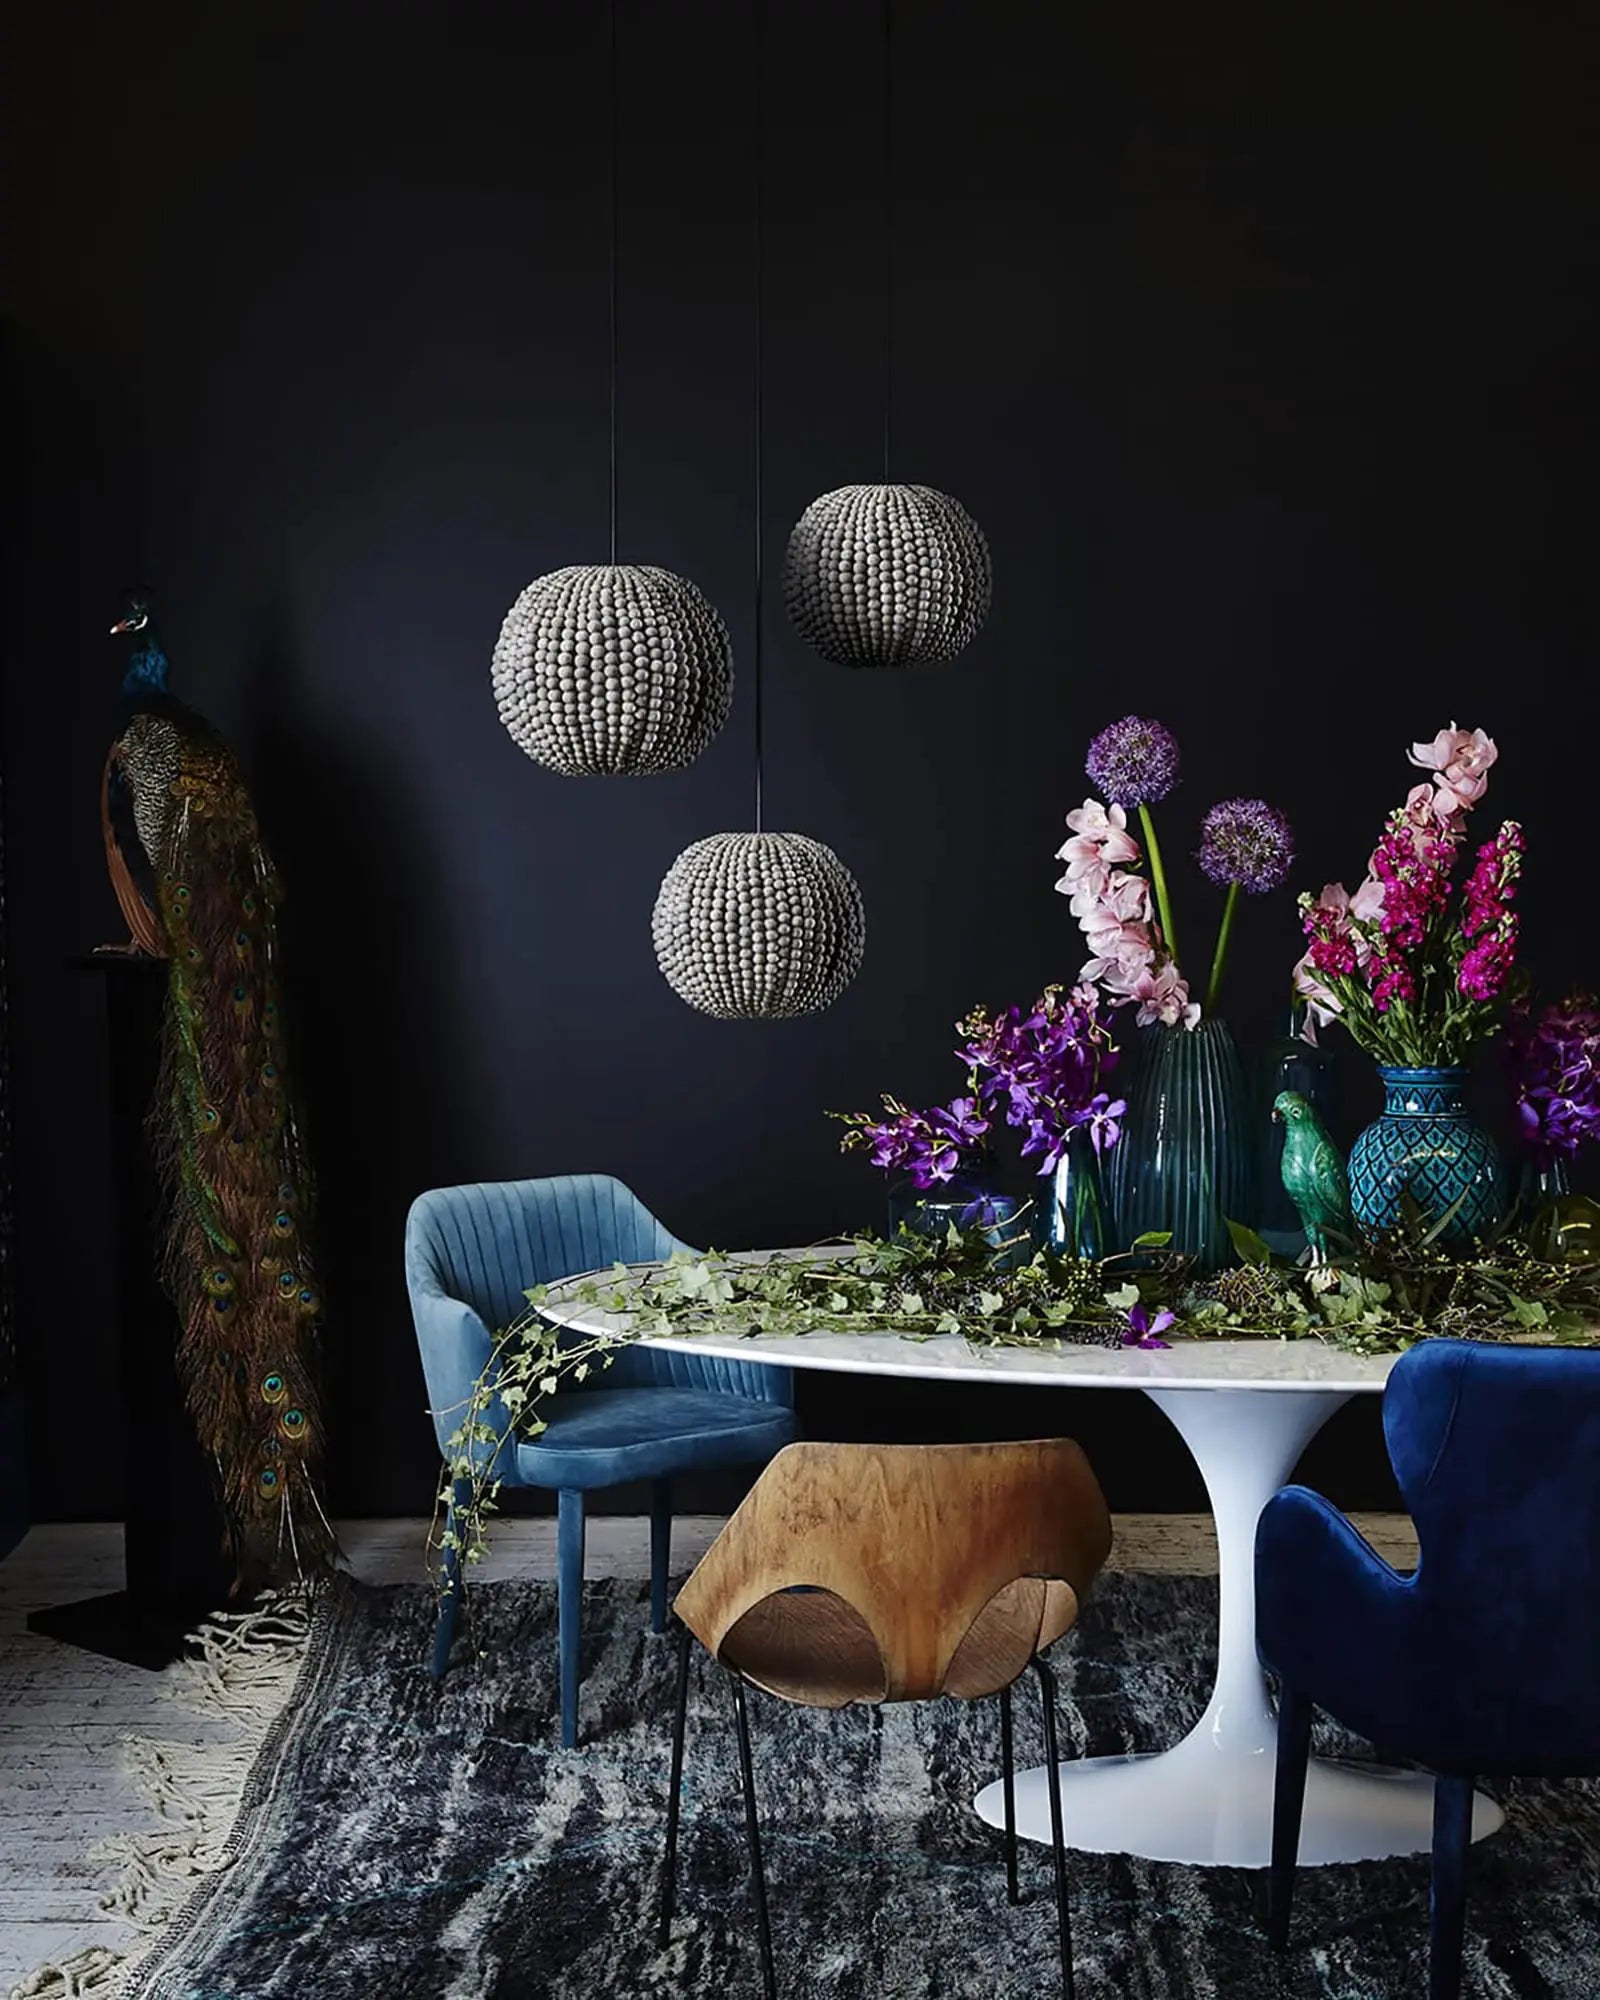 Sphere pendant light above dining table